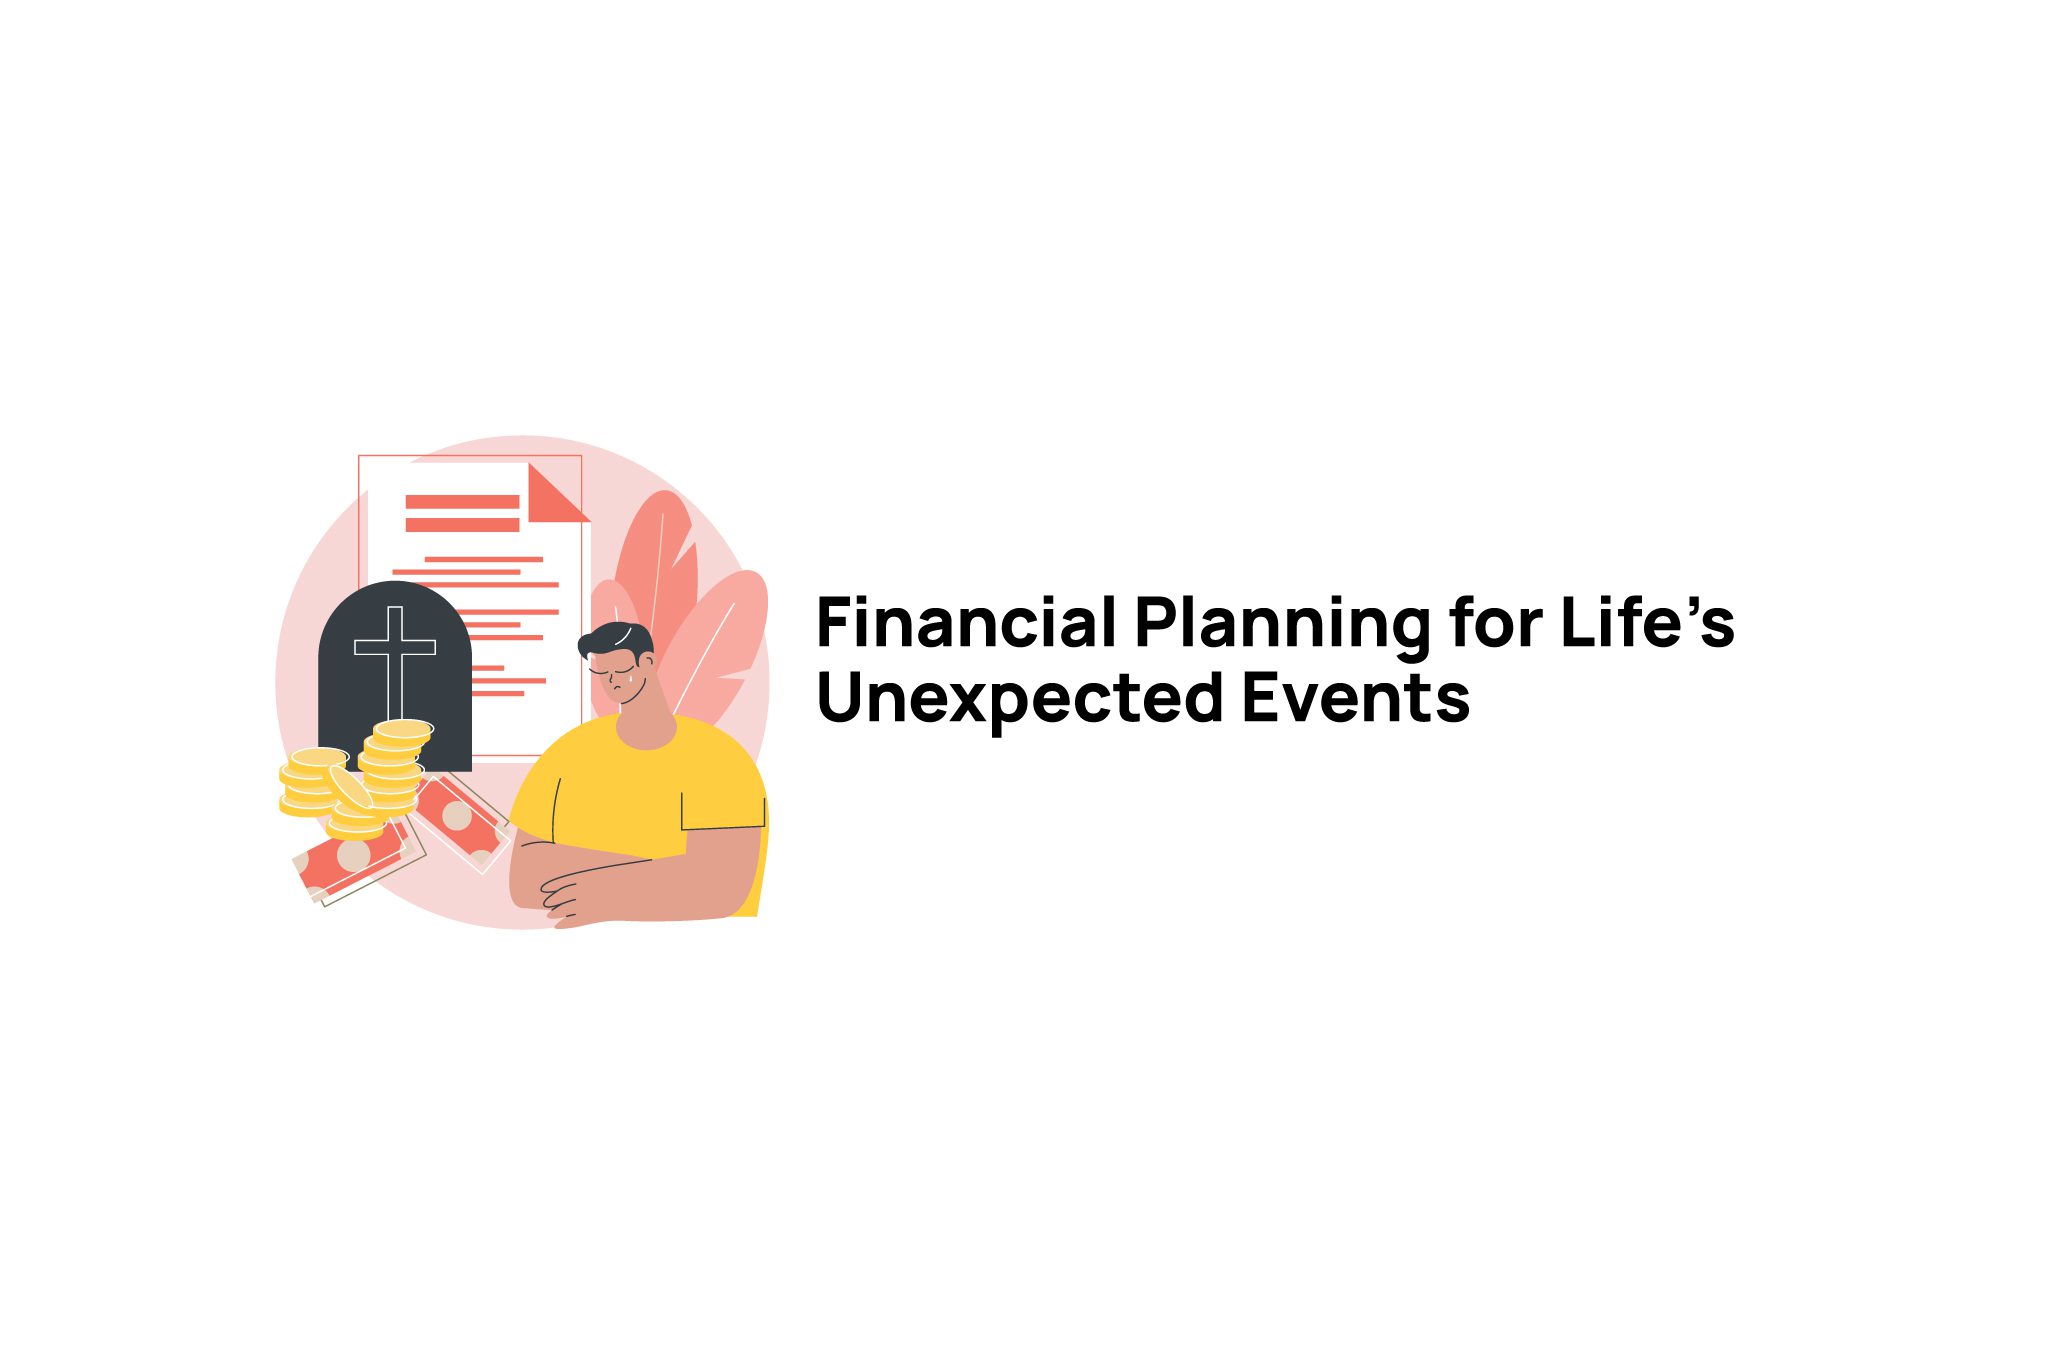 Financial Planning for Life's Unexpected Events